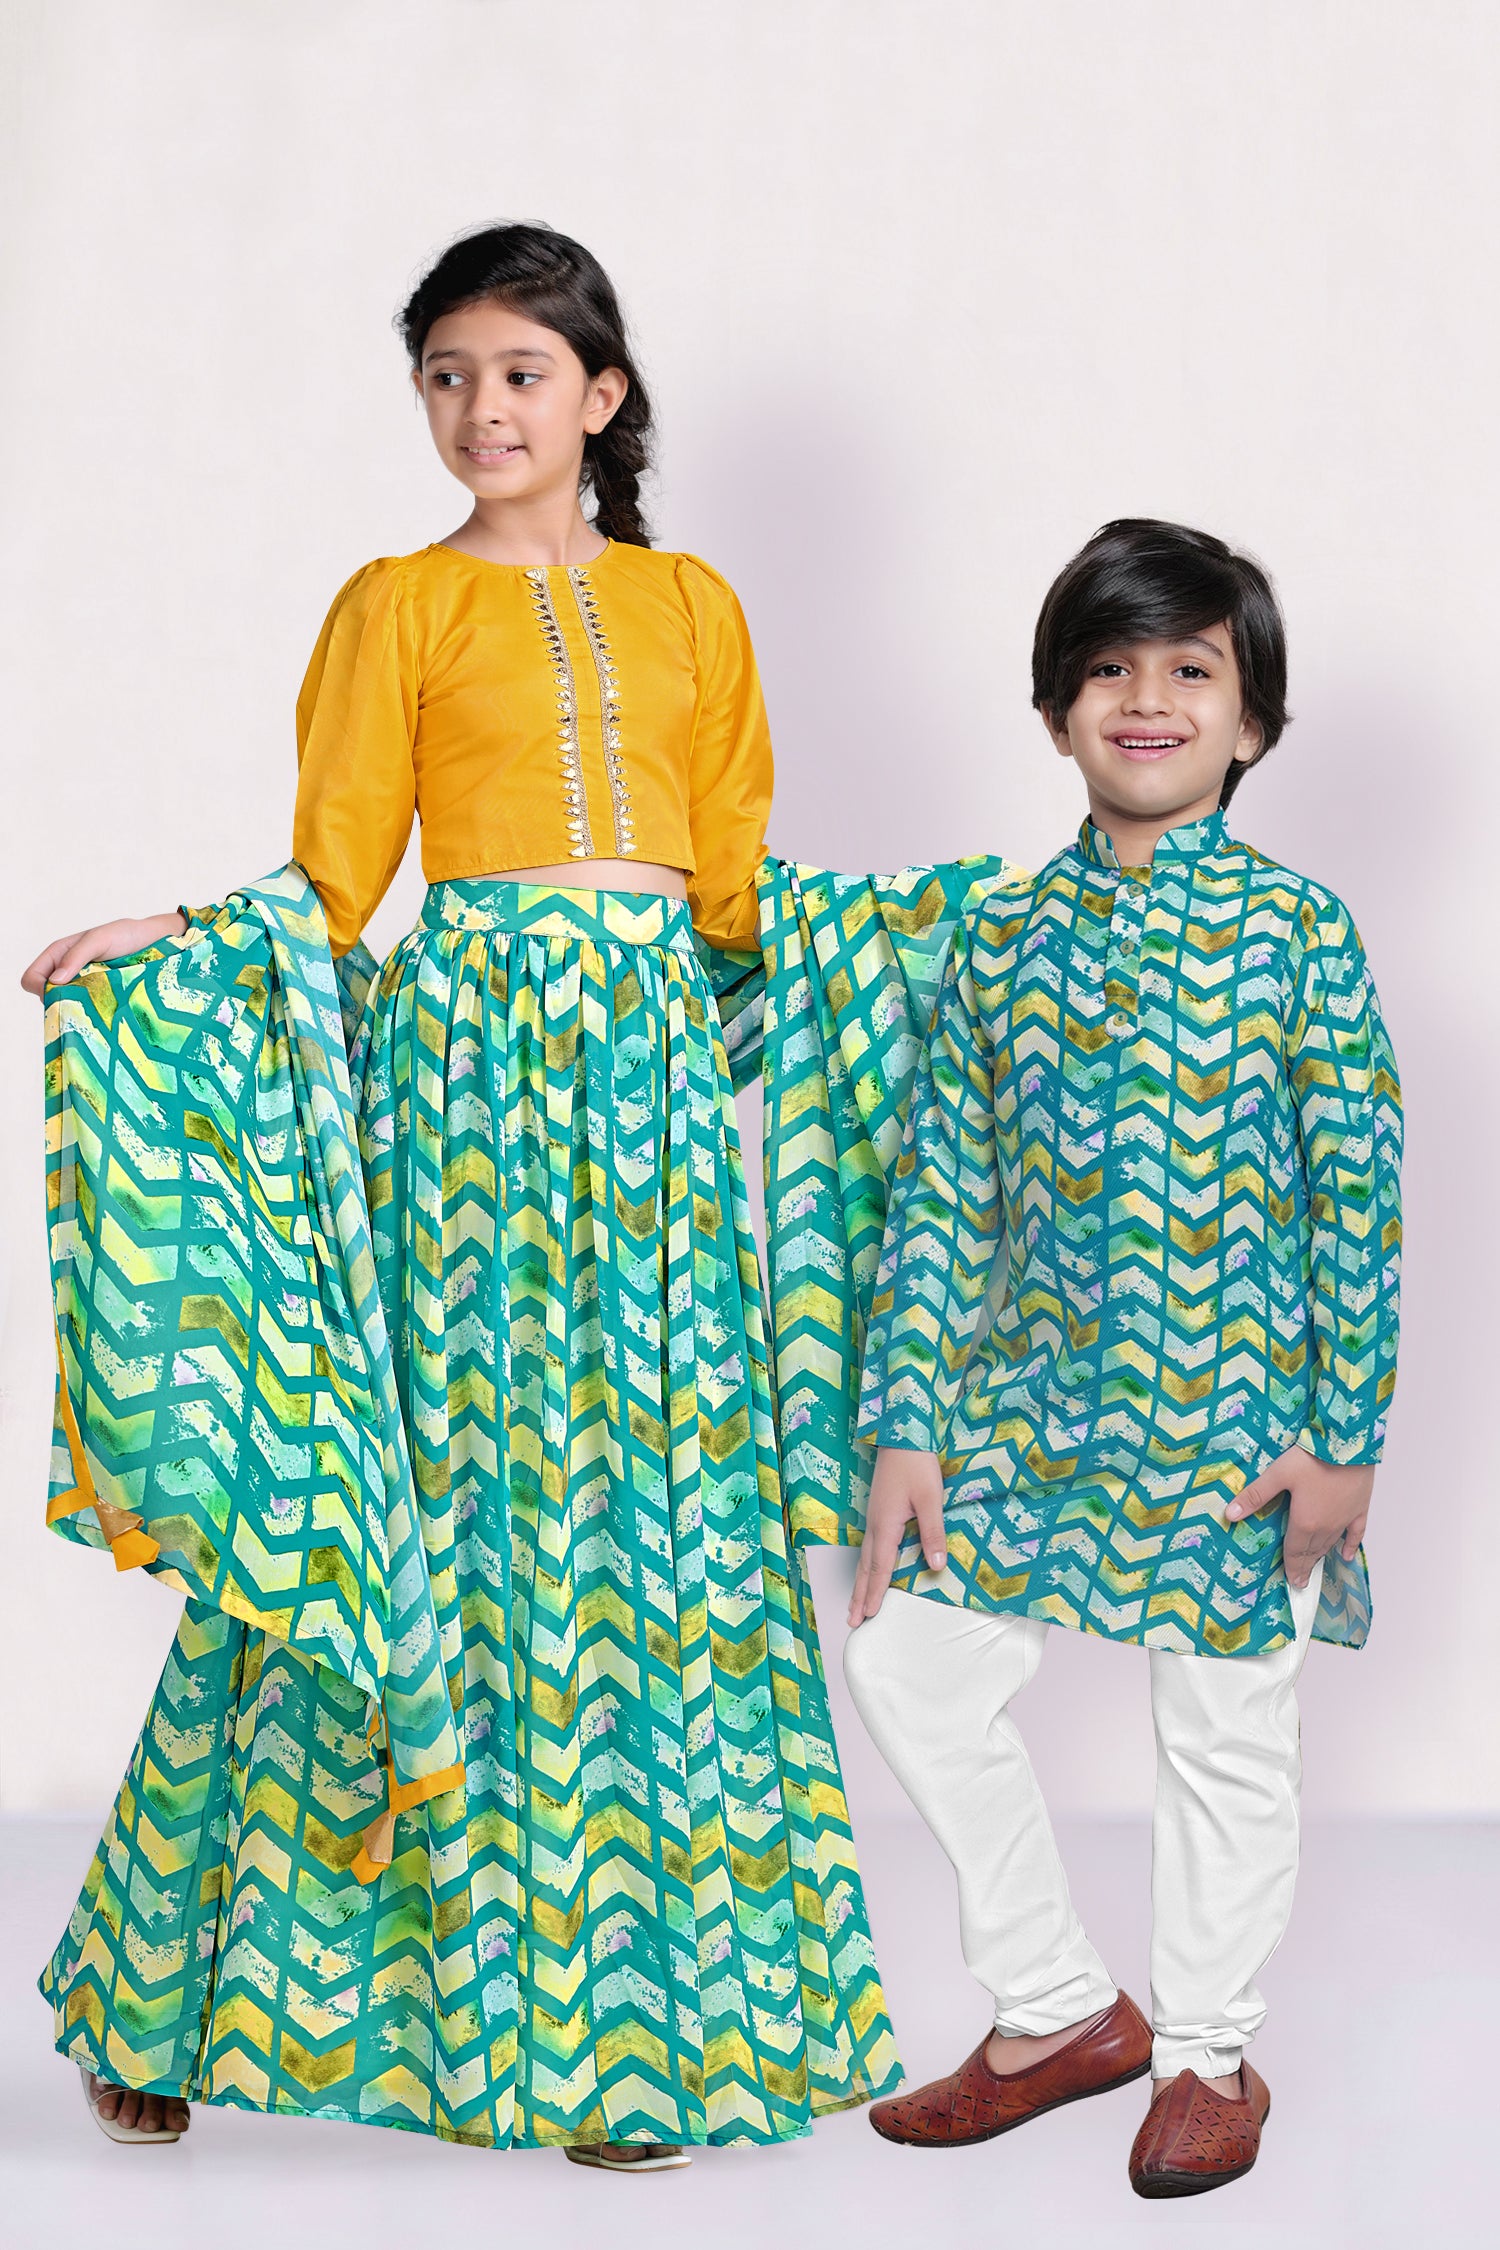 Ethnic Dresses , Brother and Sister Matching Outfits, Boys and Girls Combo  Dress | eBay